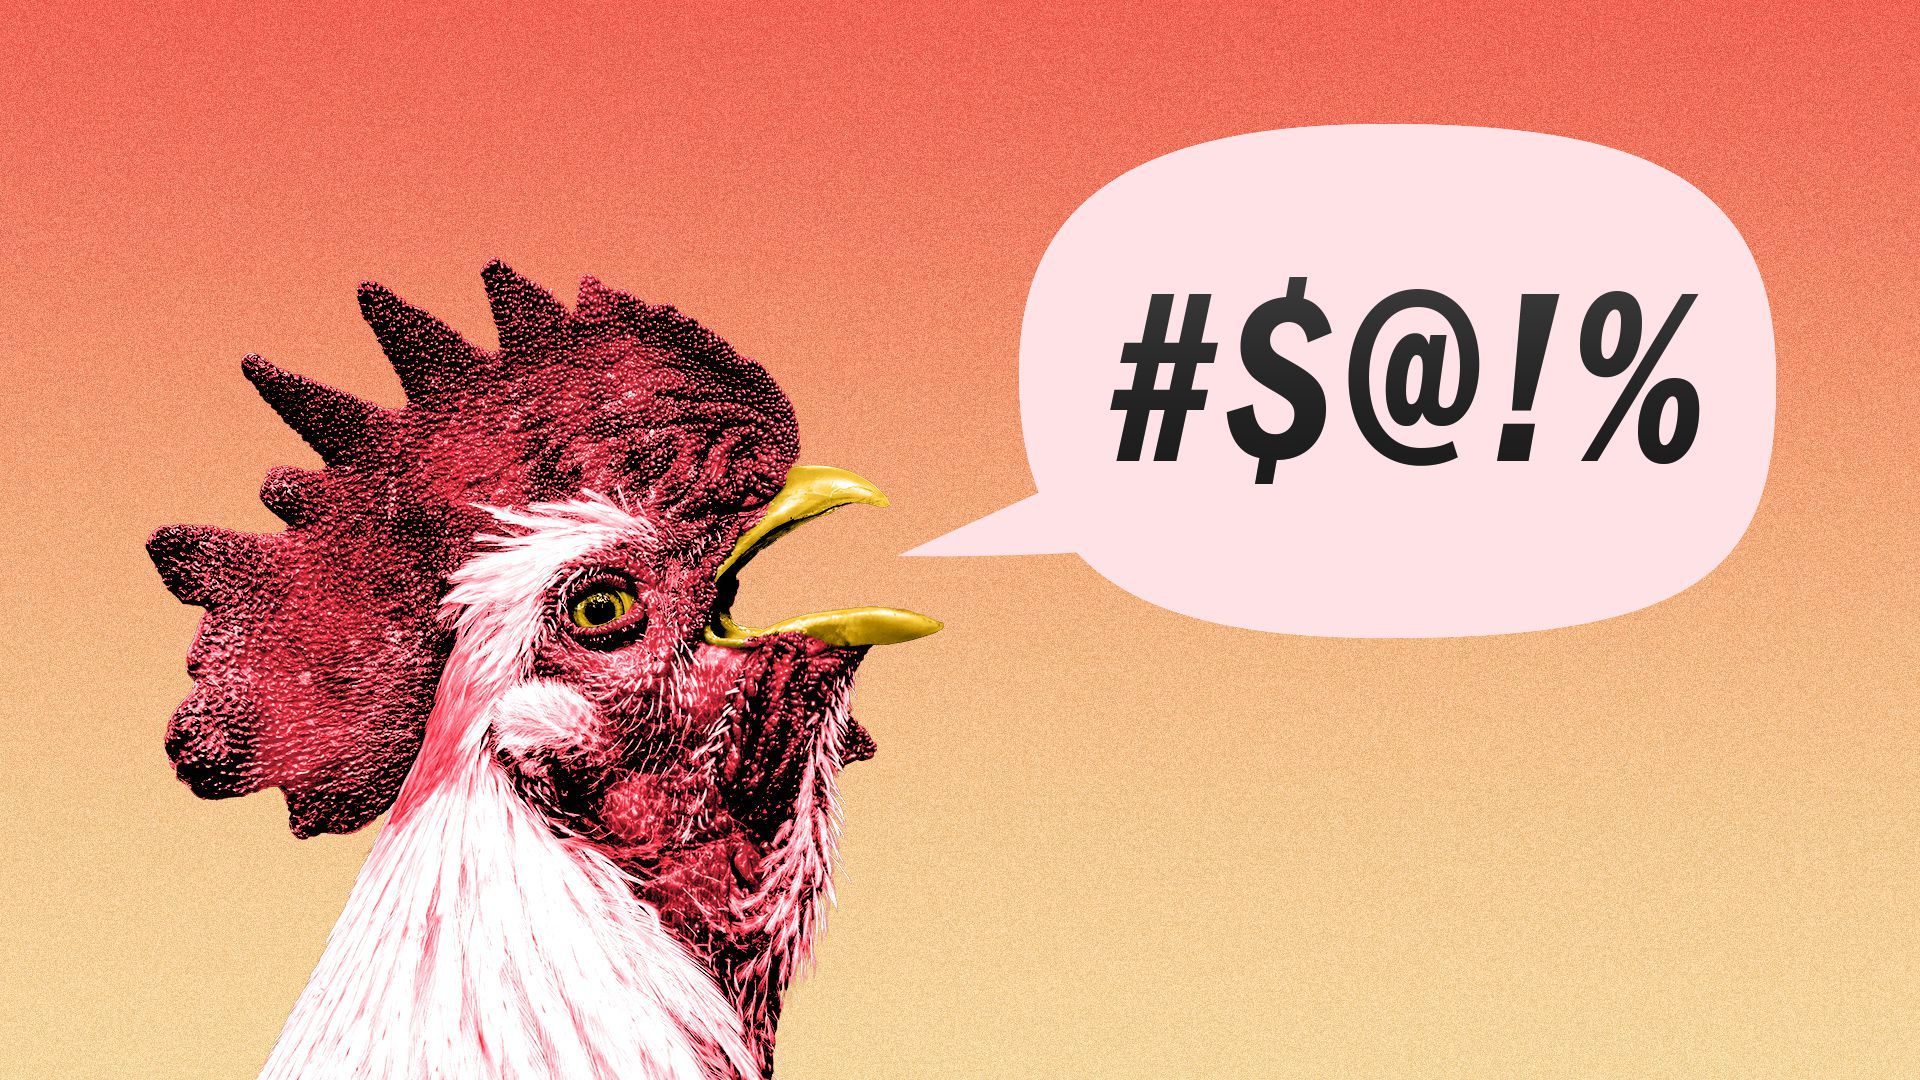 Illustration of a rooster, with a word balloon coming out of its mouth with swearing-substitute symbols in it.